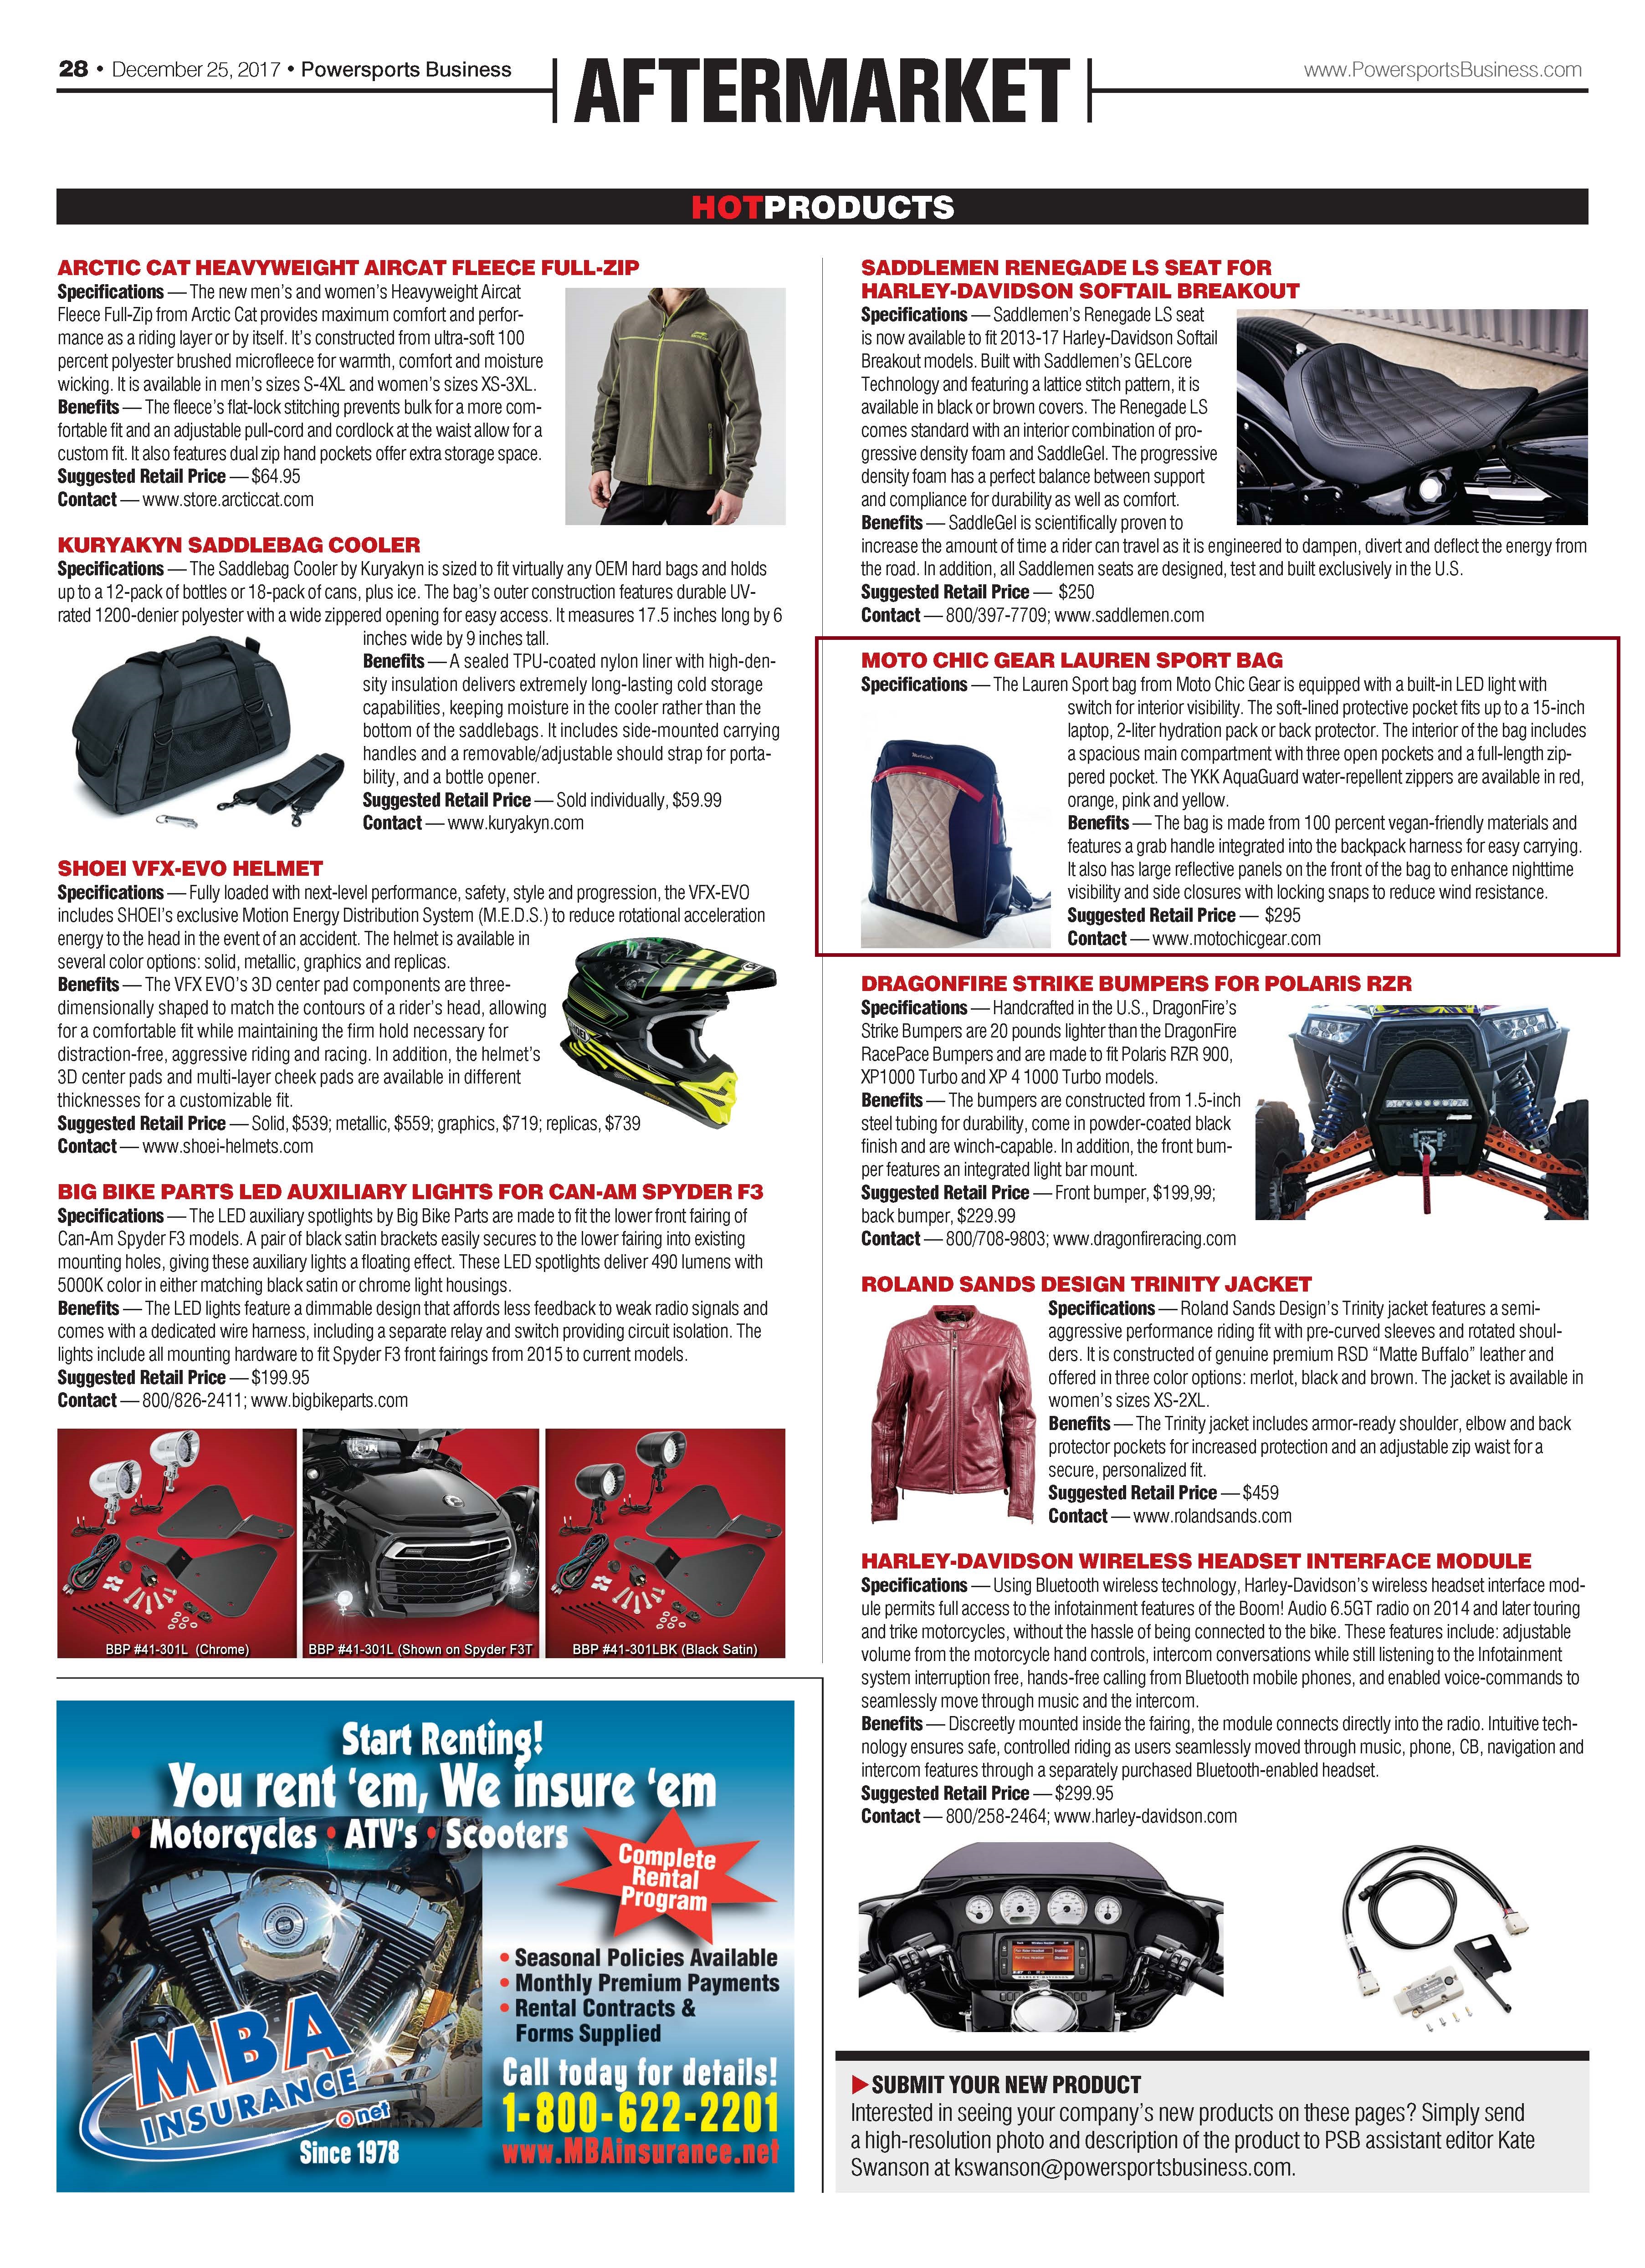 December 25 2017 - Powersports Business - Aftermarket Hot Products